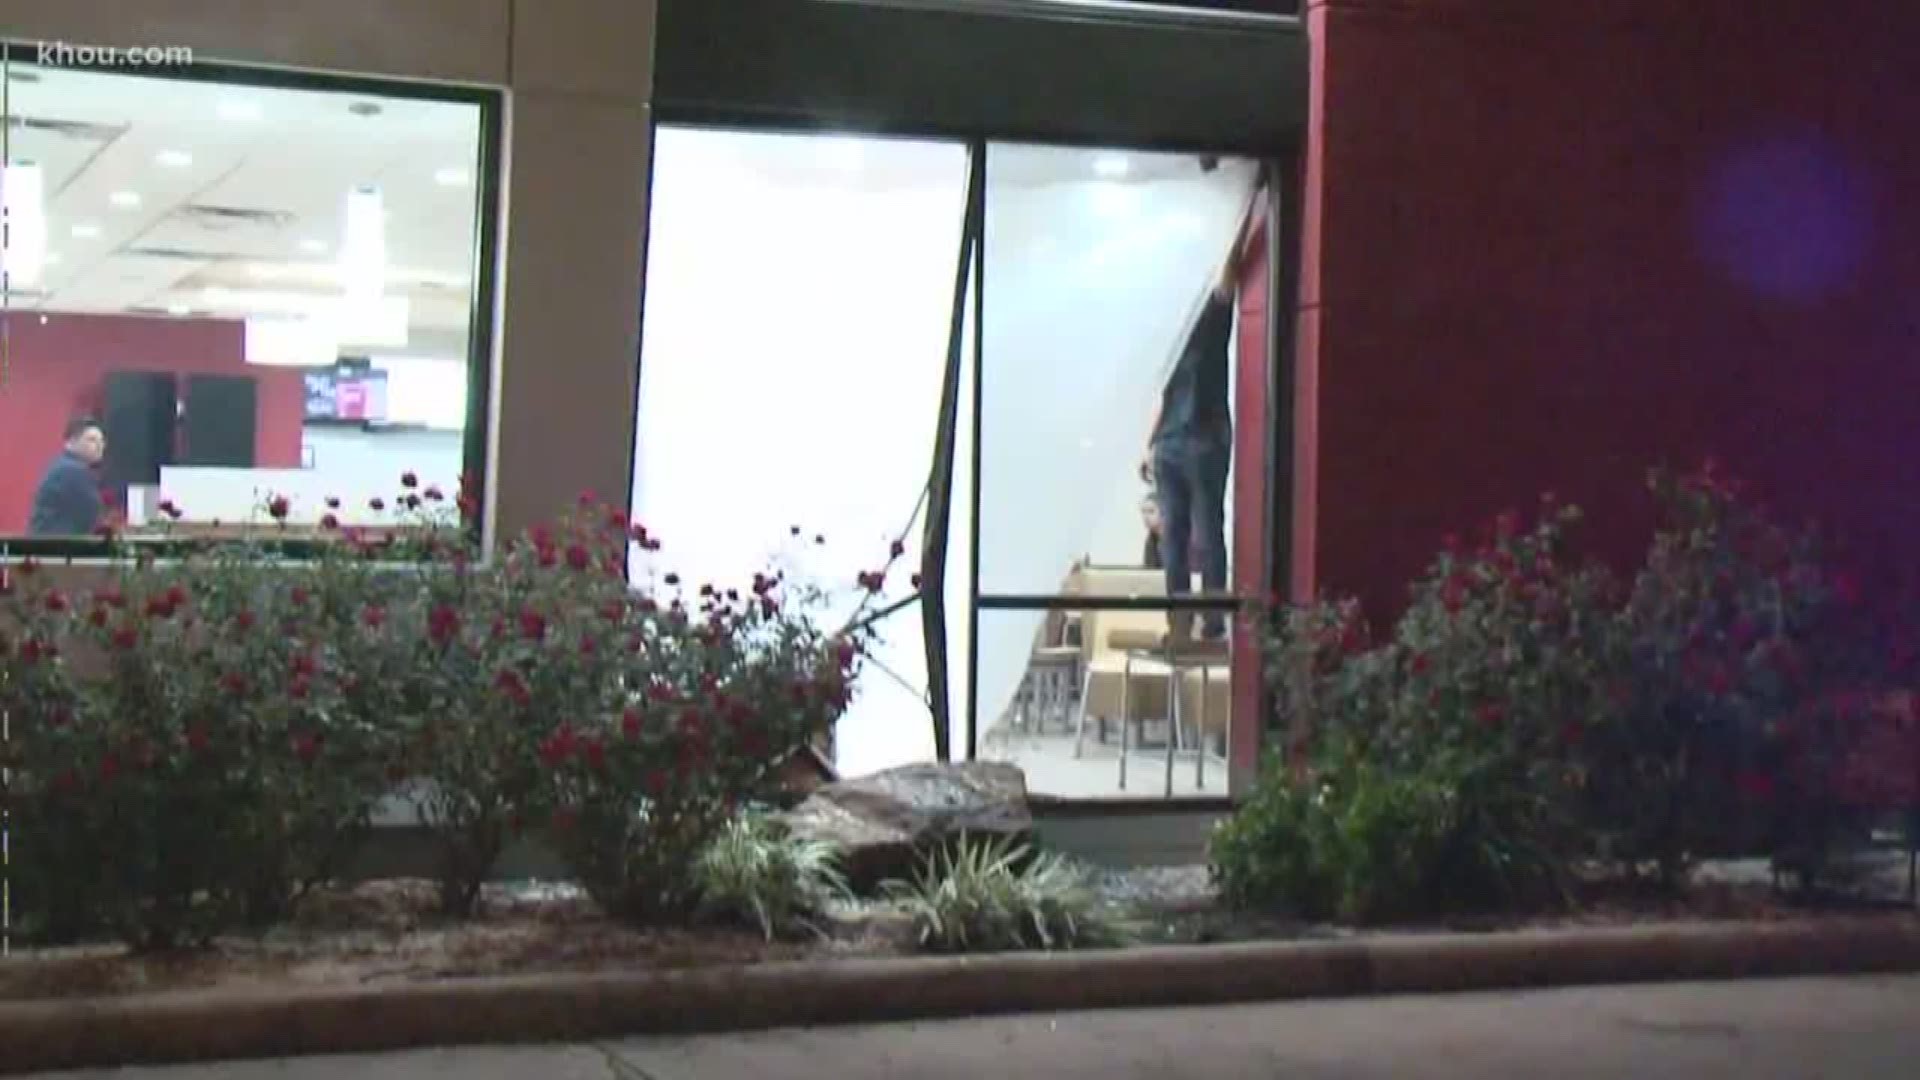 A police chase with four suspected gang members ended when they crashed their car into the front of a Wendy's restaurant Wednesday night.